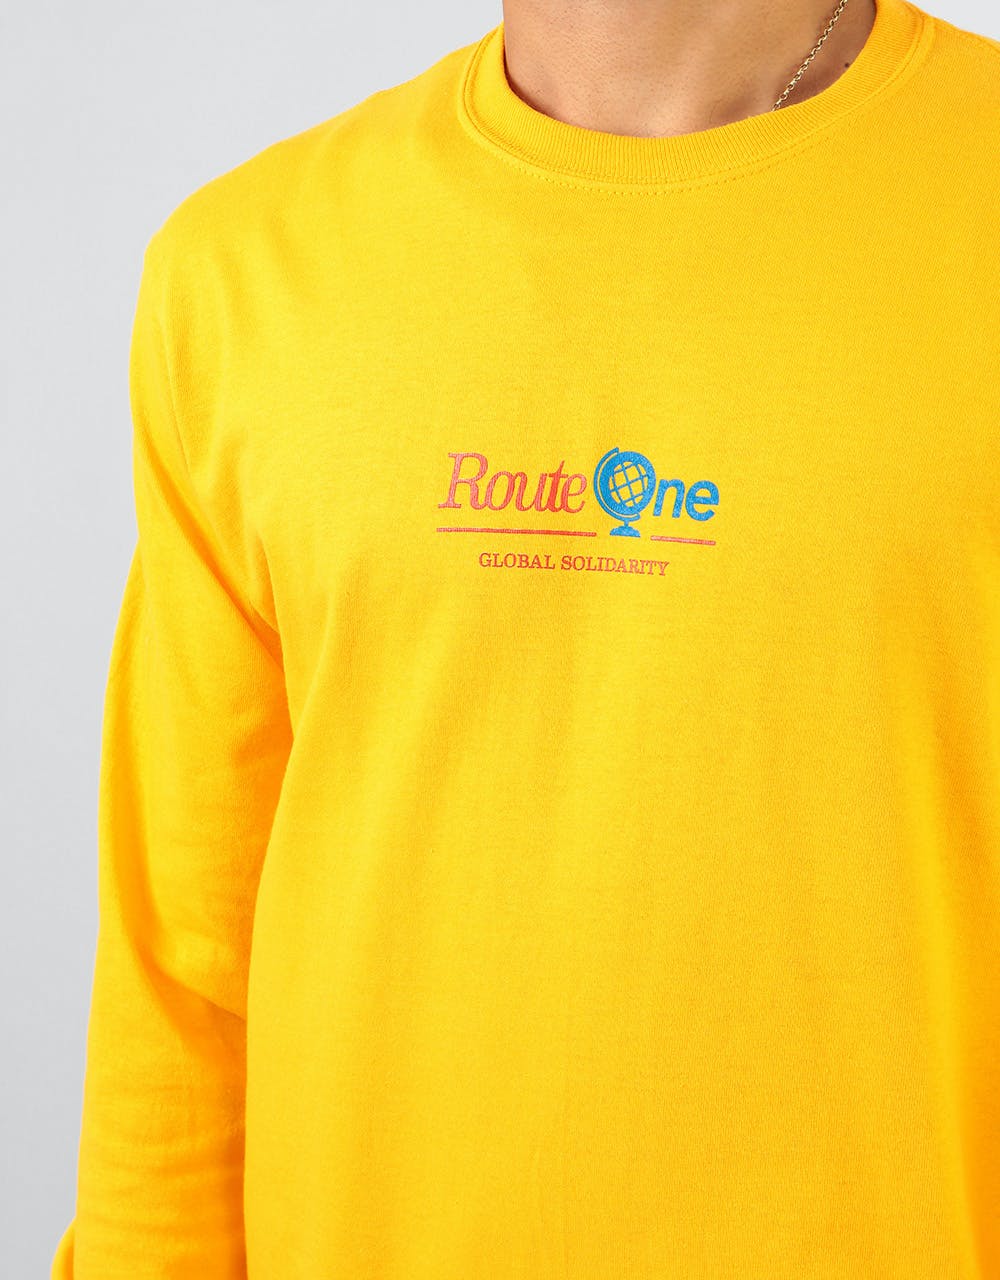 Route One Solidarity Long Sleeve T-Shirt - Gold